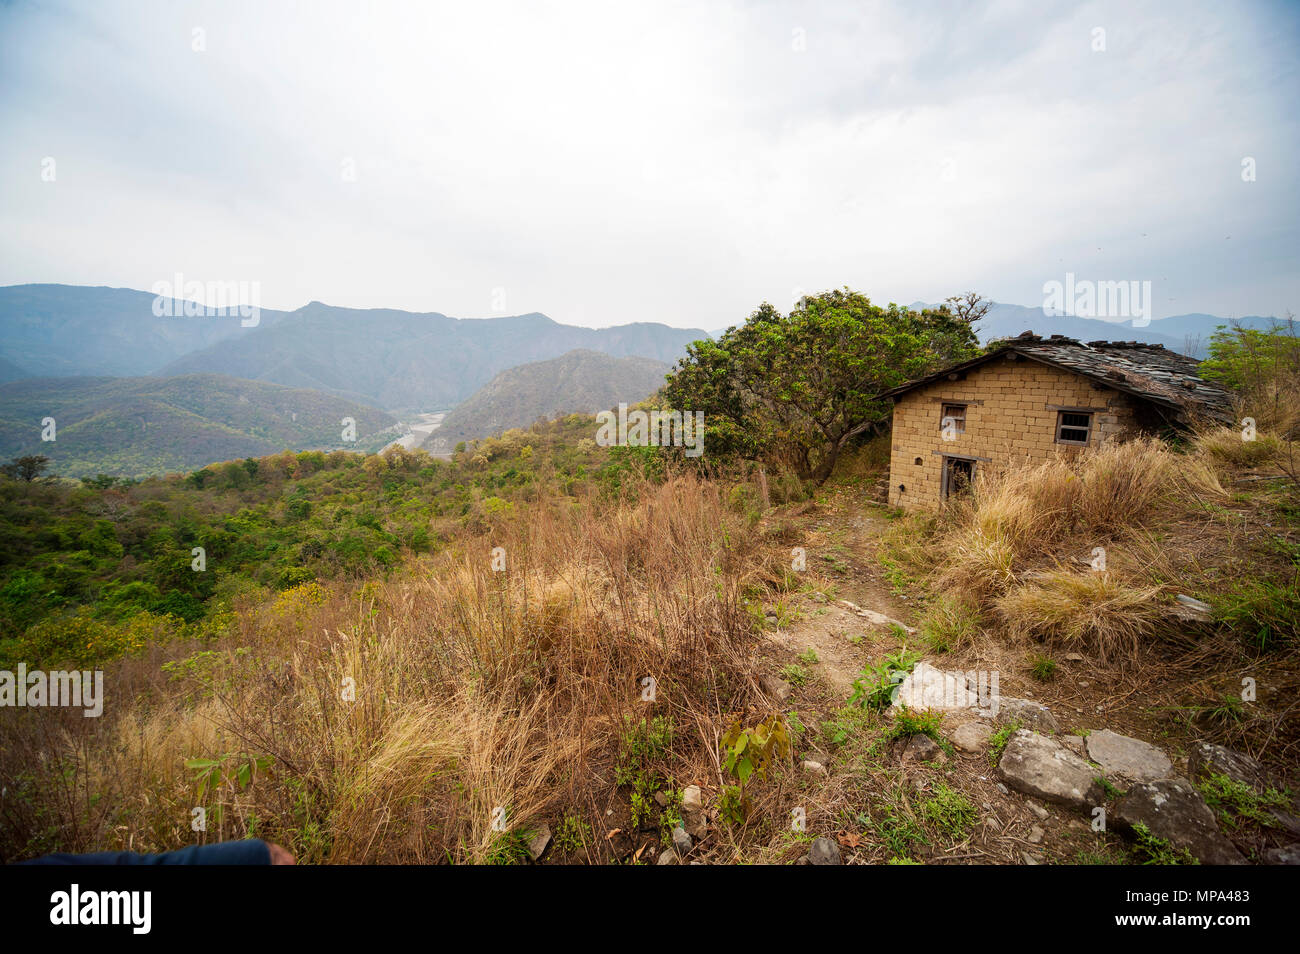 Abandoned Houses At Thak Village Thak Was Made Famous By Jim Corbett 